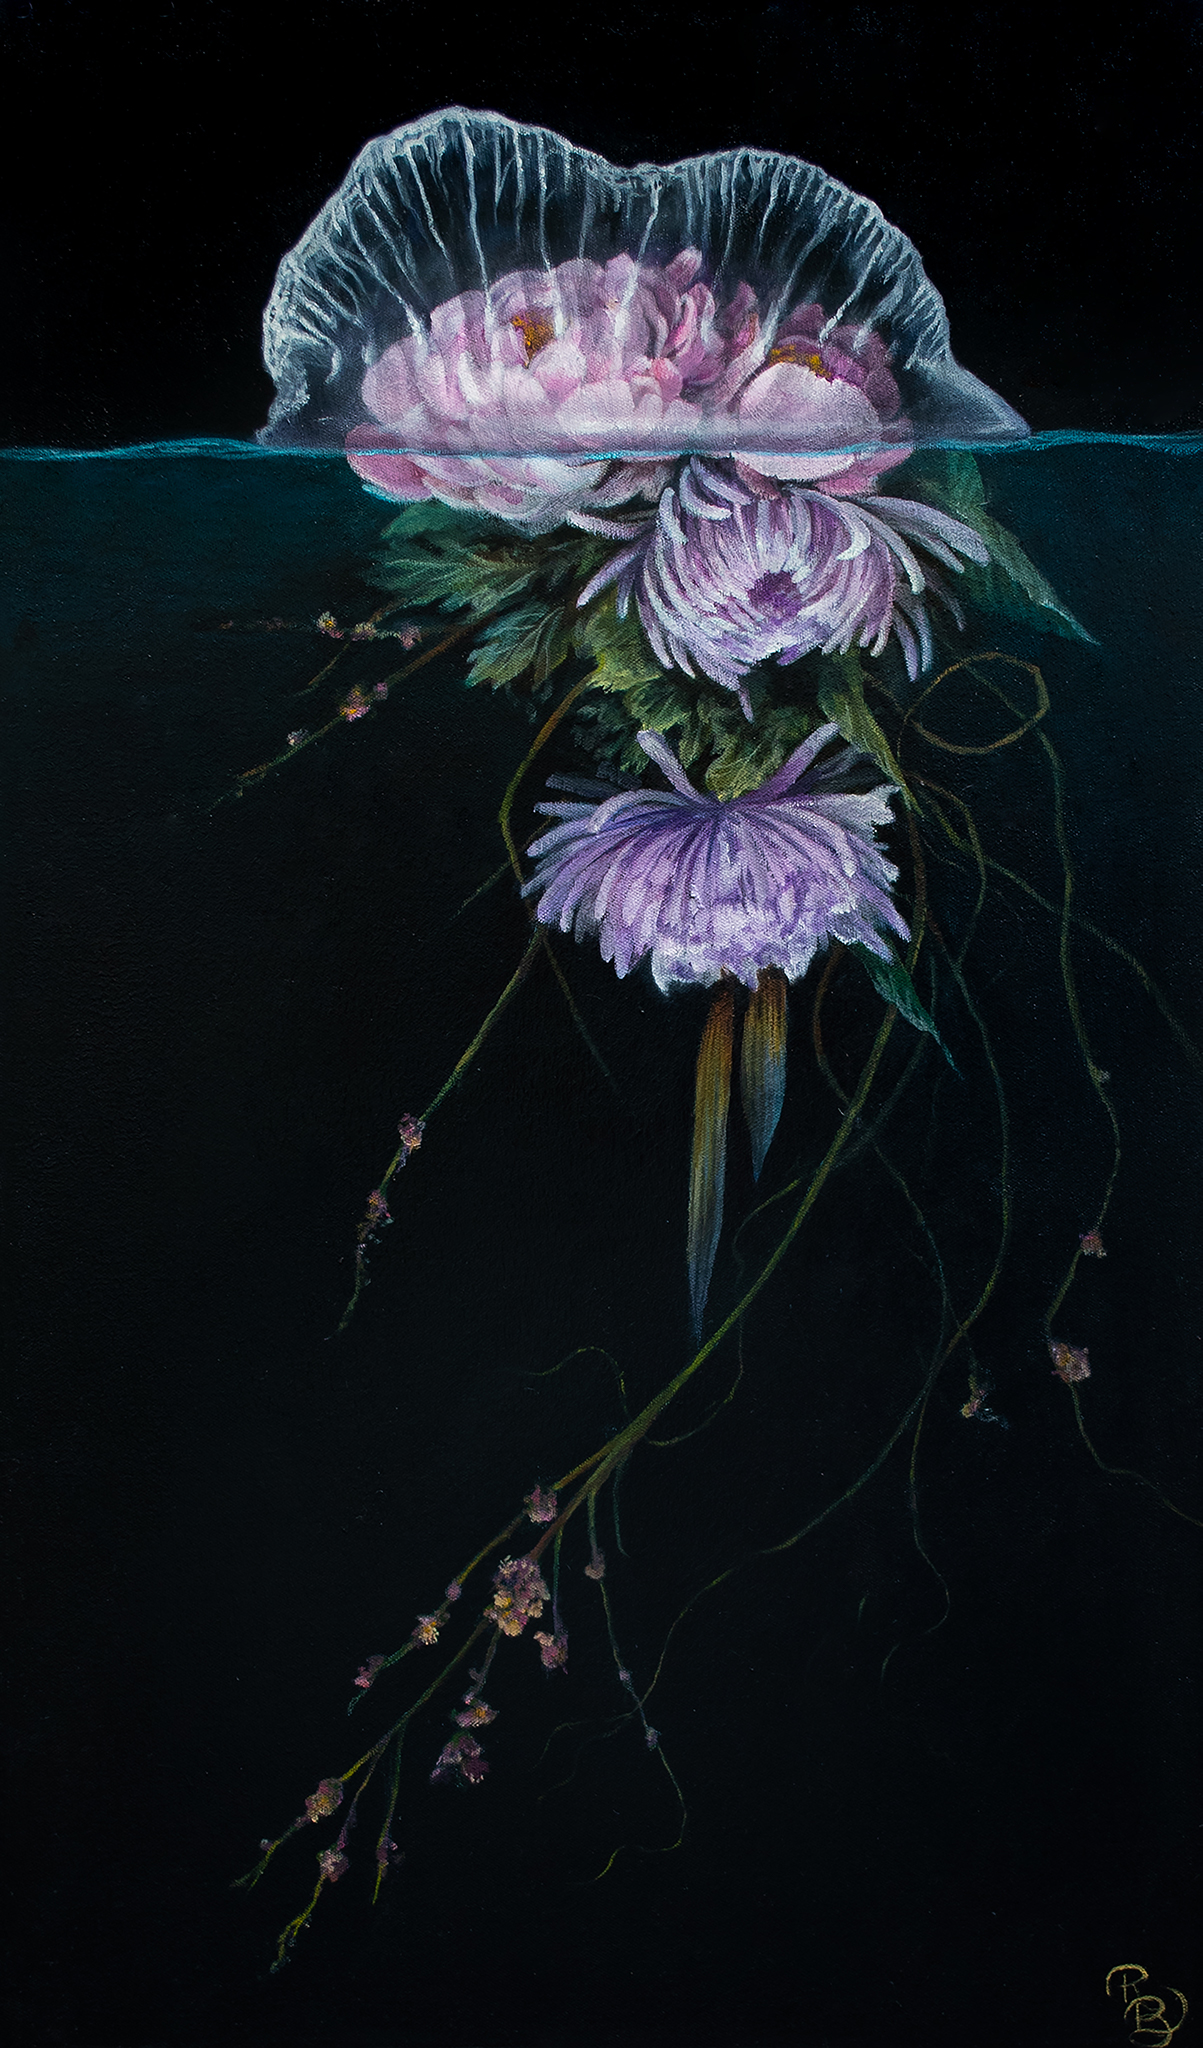 Man-o-war jellyfish floating on water withe peonies, chrysanthemums, small budded flowers and vines forming the tentacles on top of a dark background